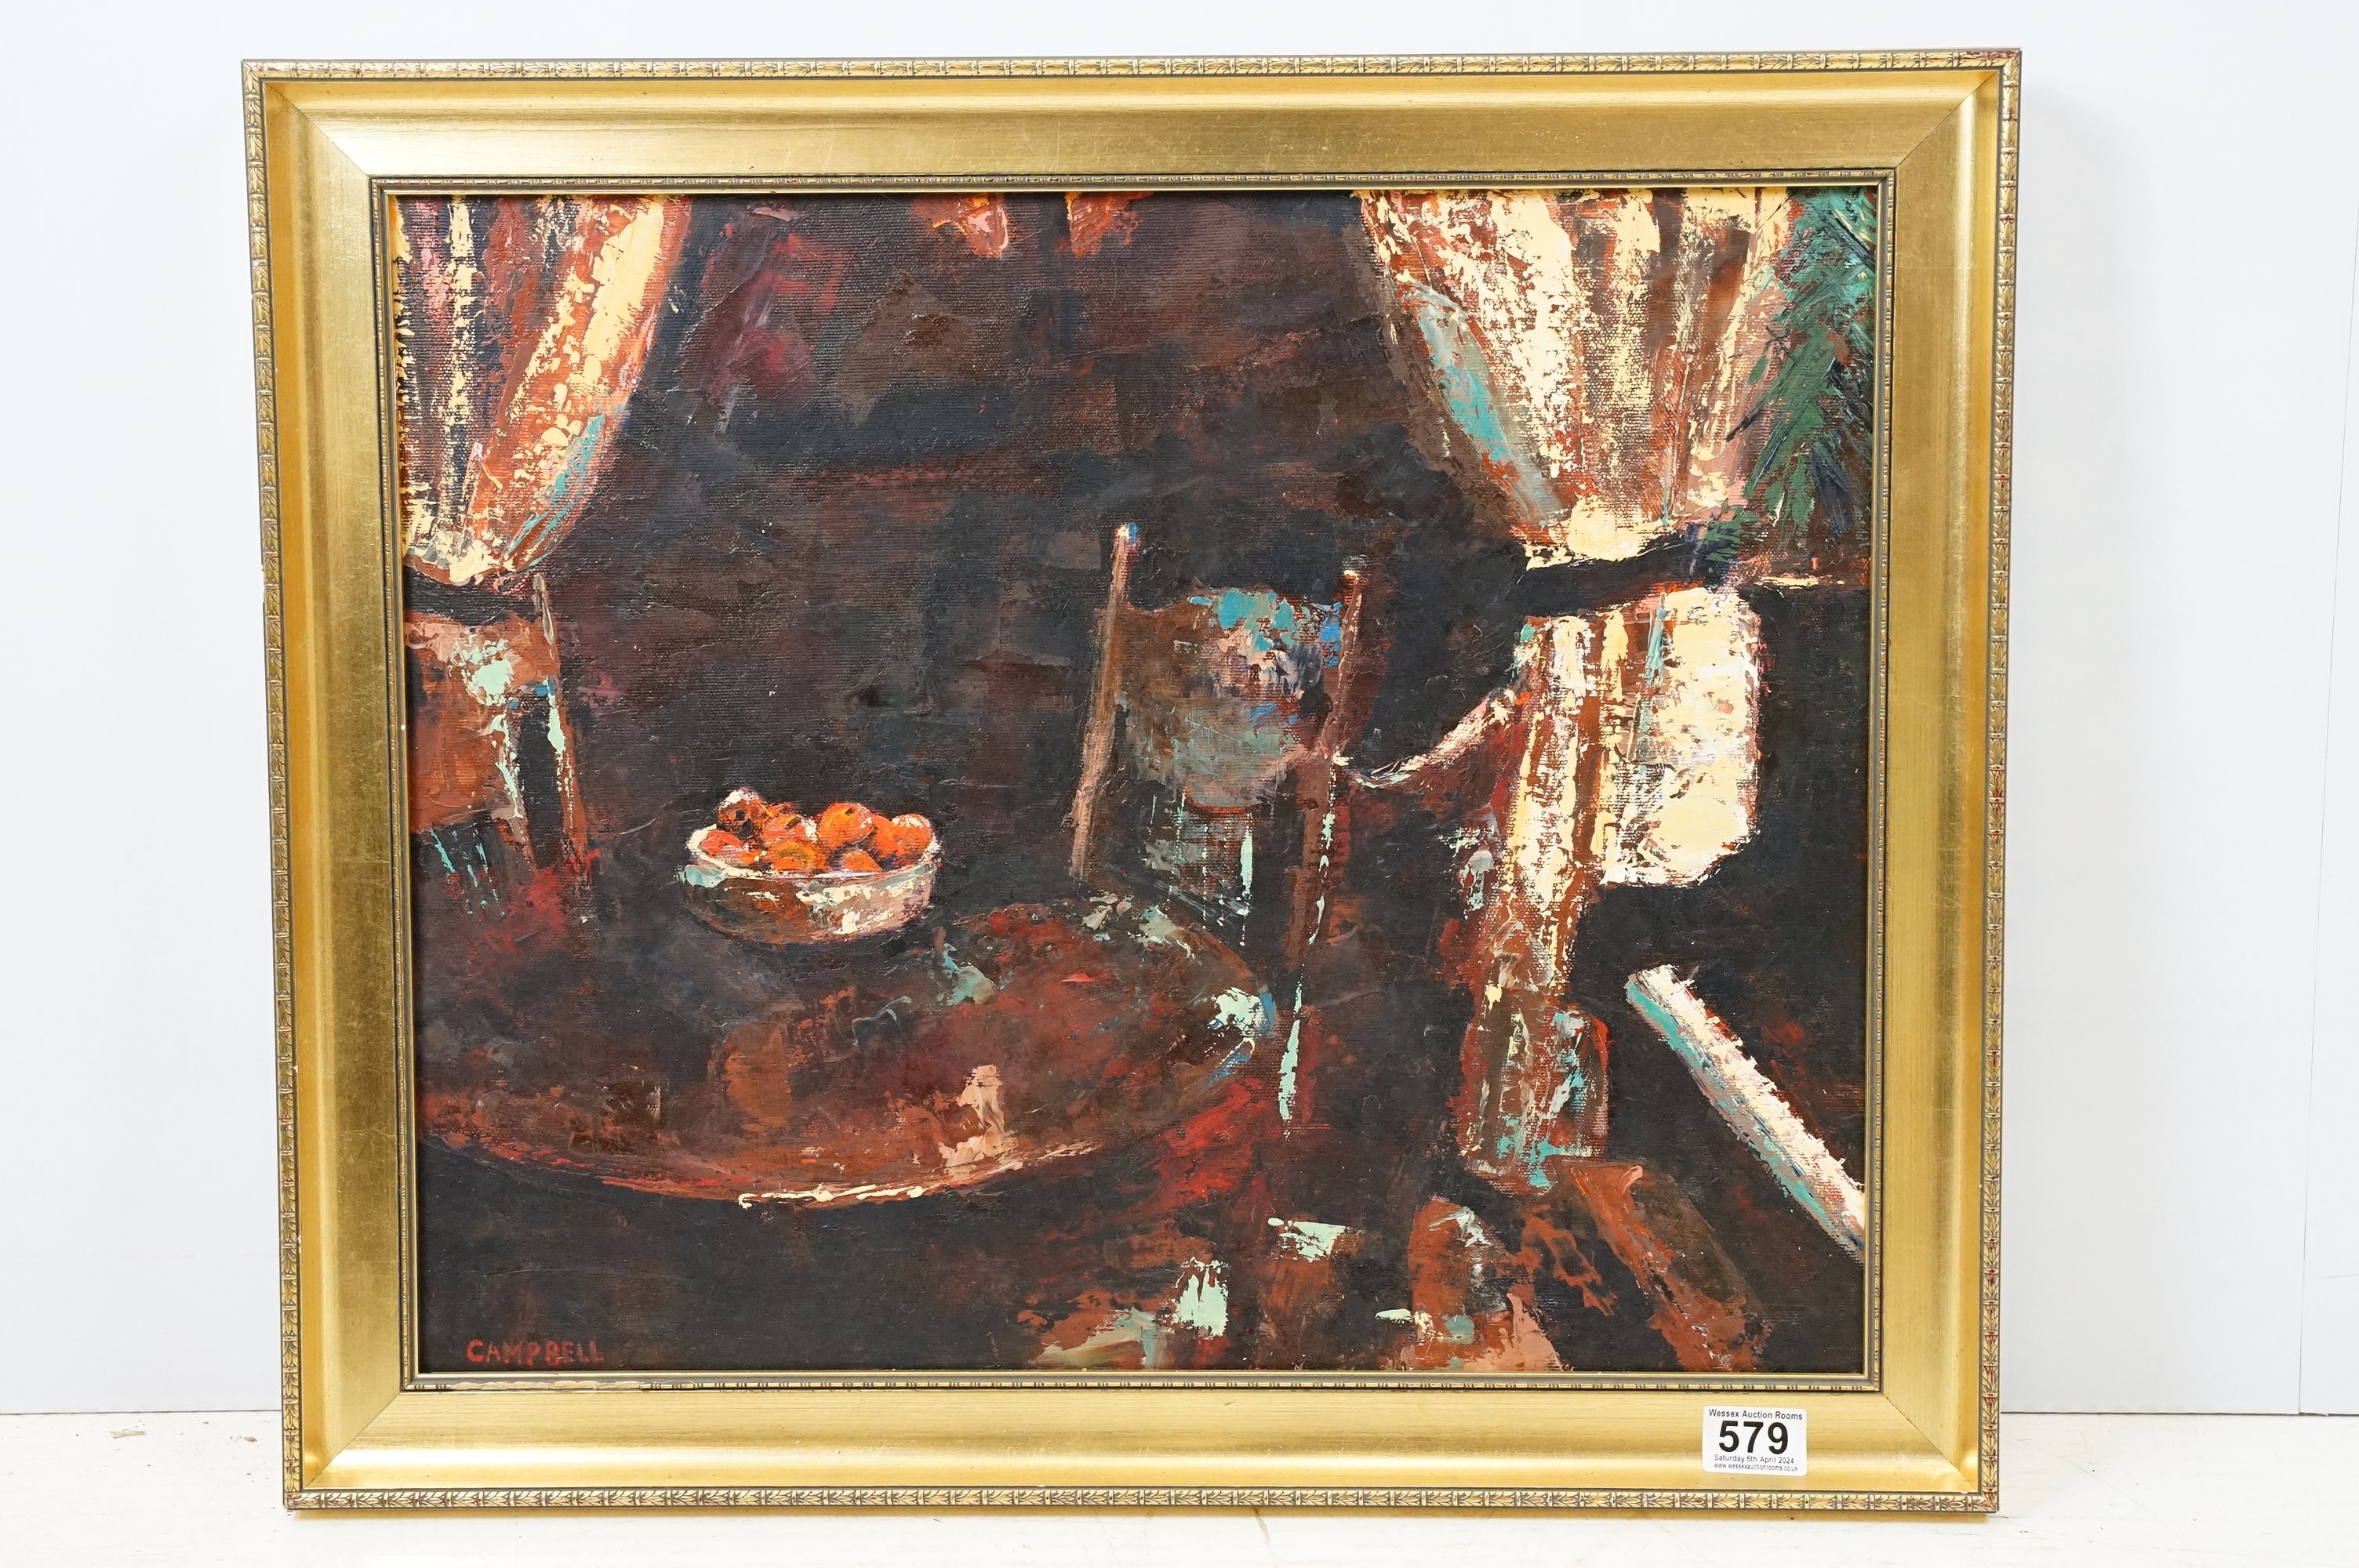 Campbell, 20th century still life interior scene with piano table, chair and bowl of fruit, oil on